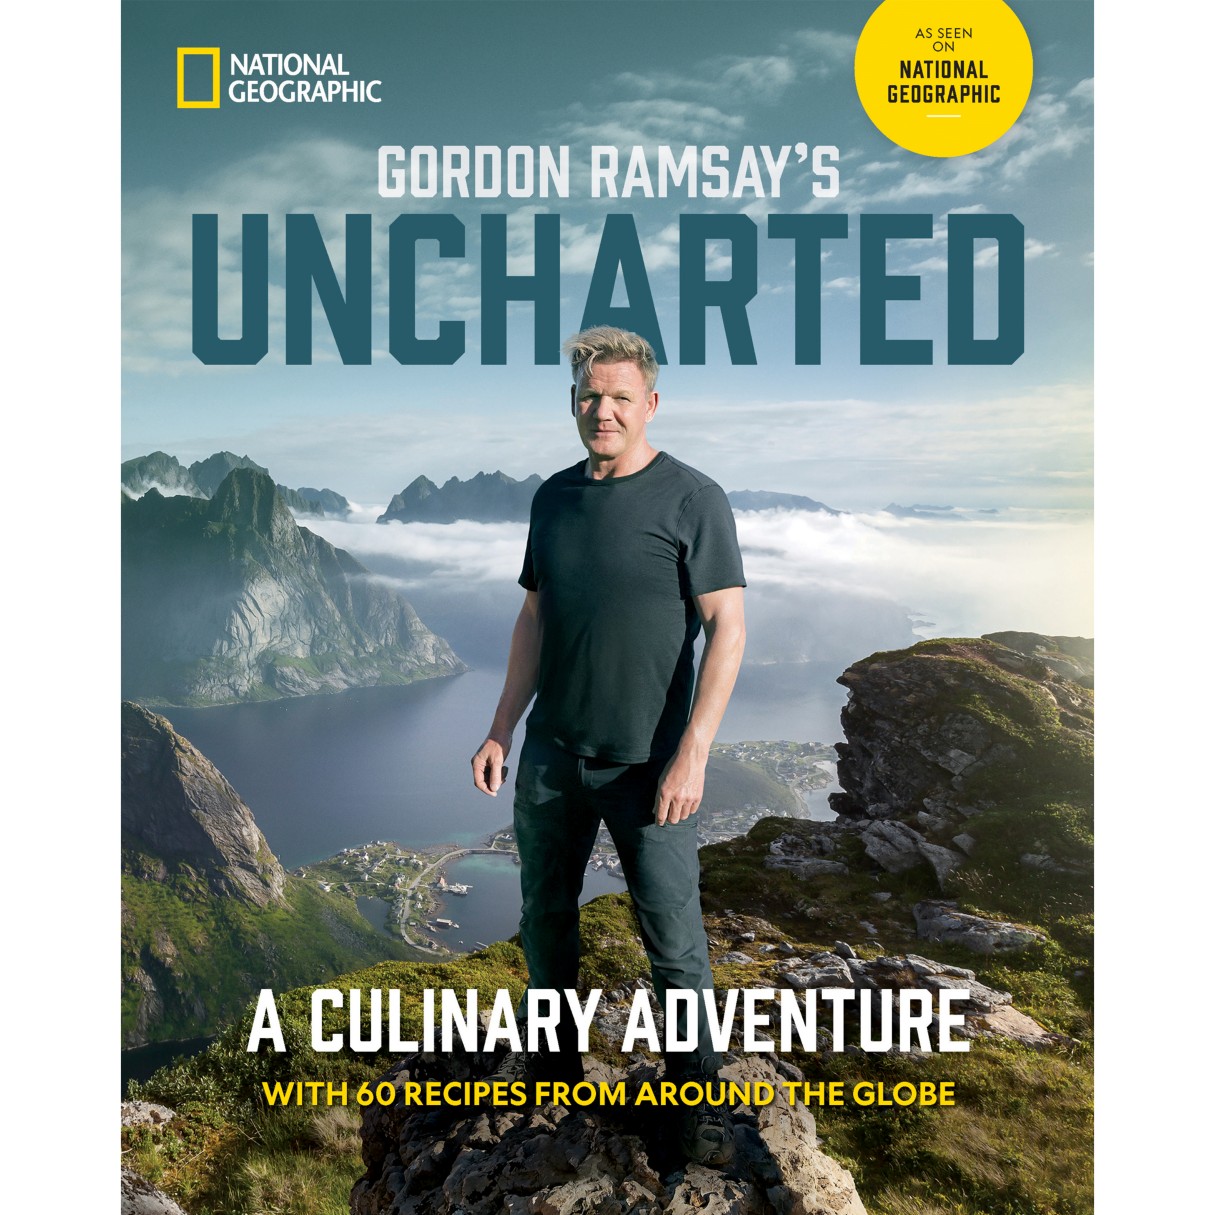 Gordon Ramsay’s Uncharted: A Culinary Adventure With 60 Recipes From Around the Globe – National Geographic